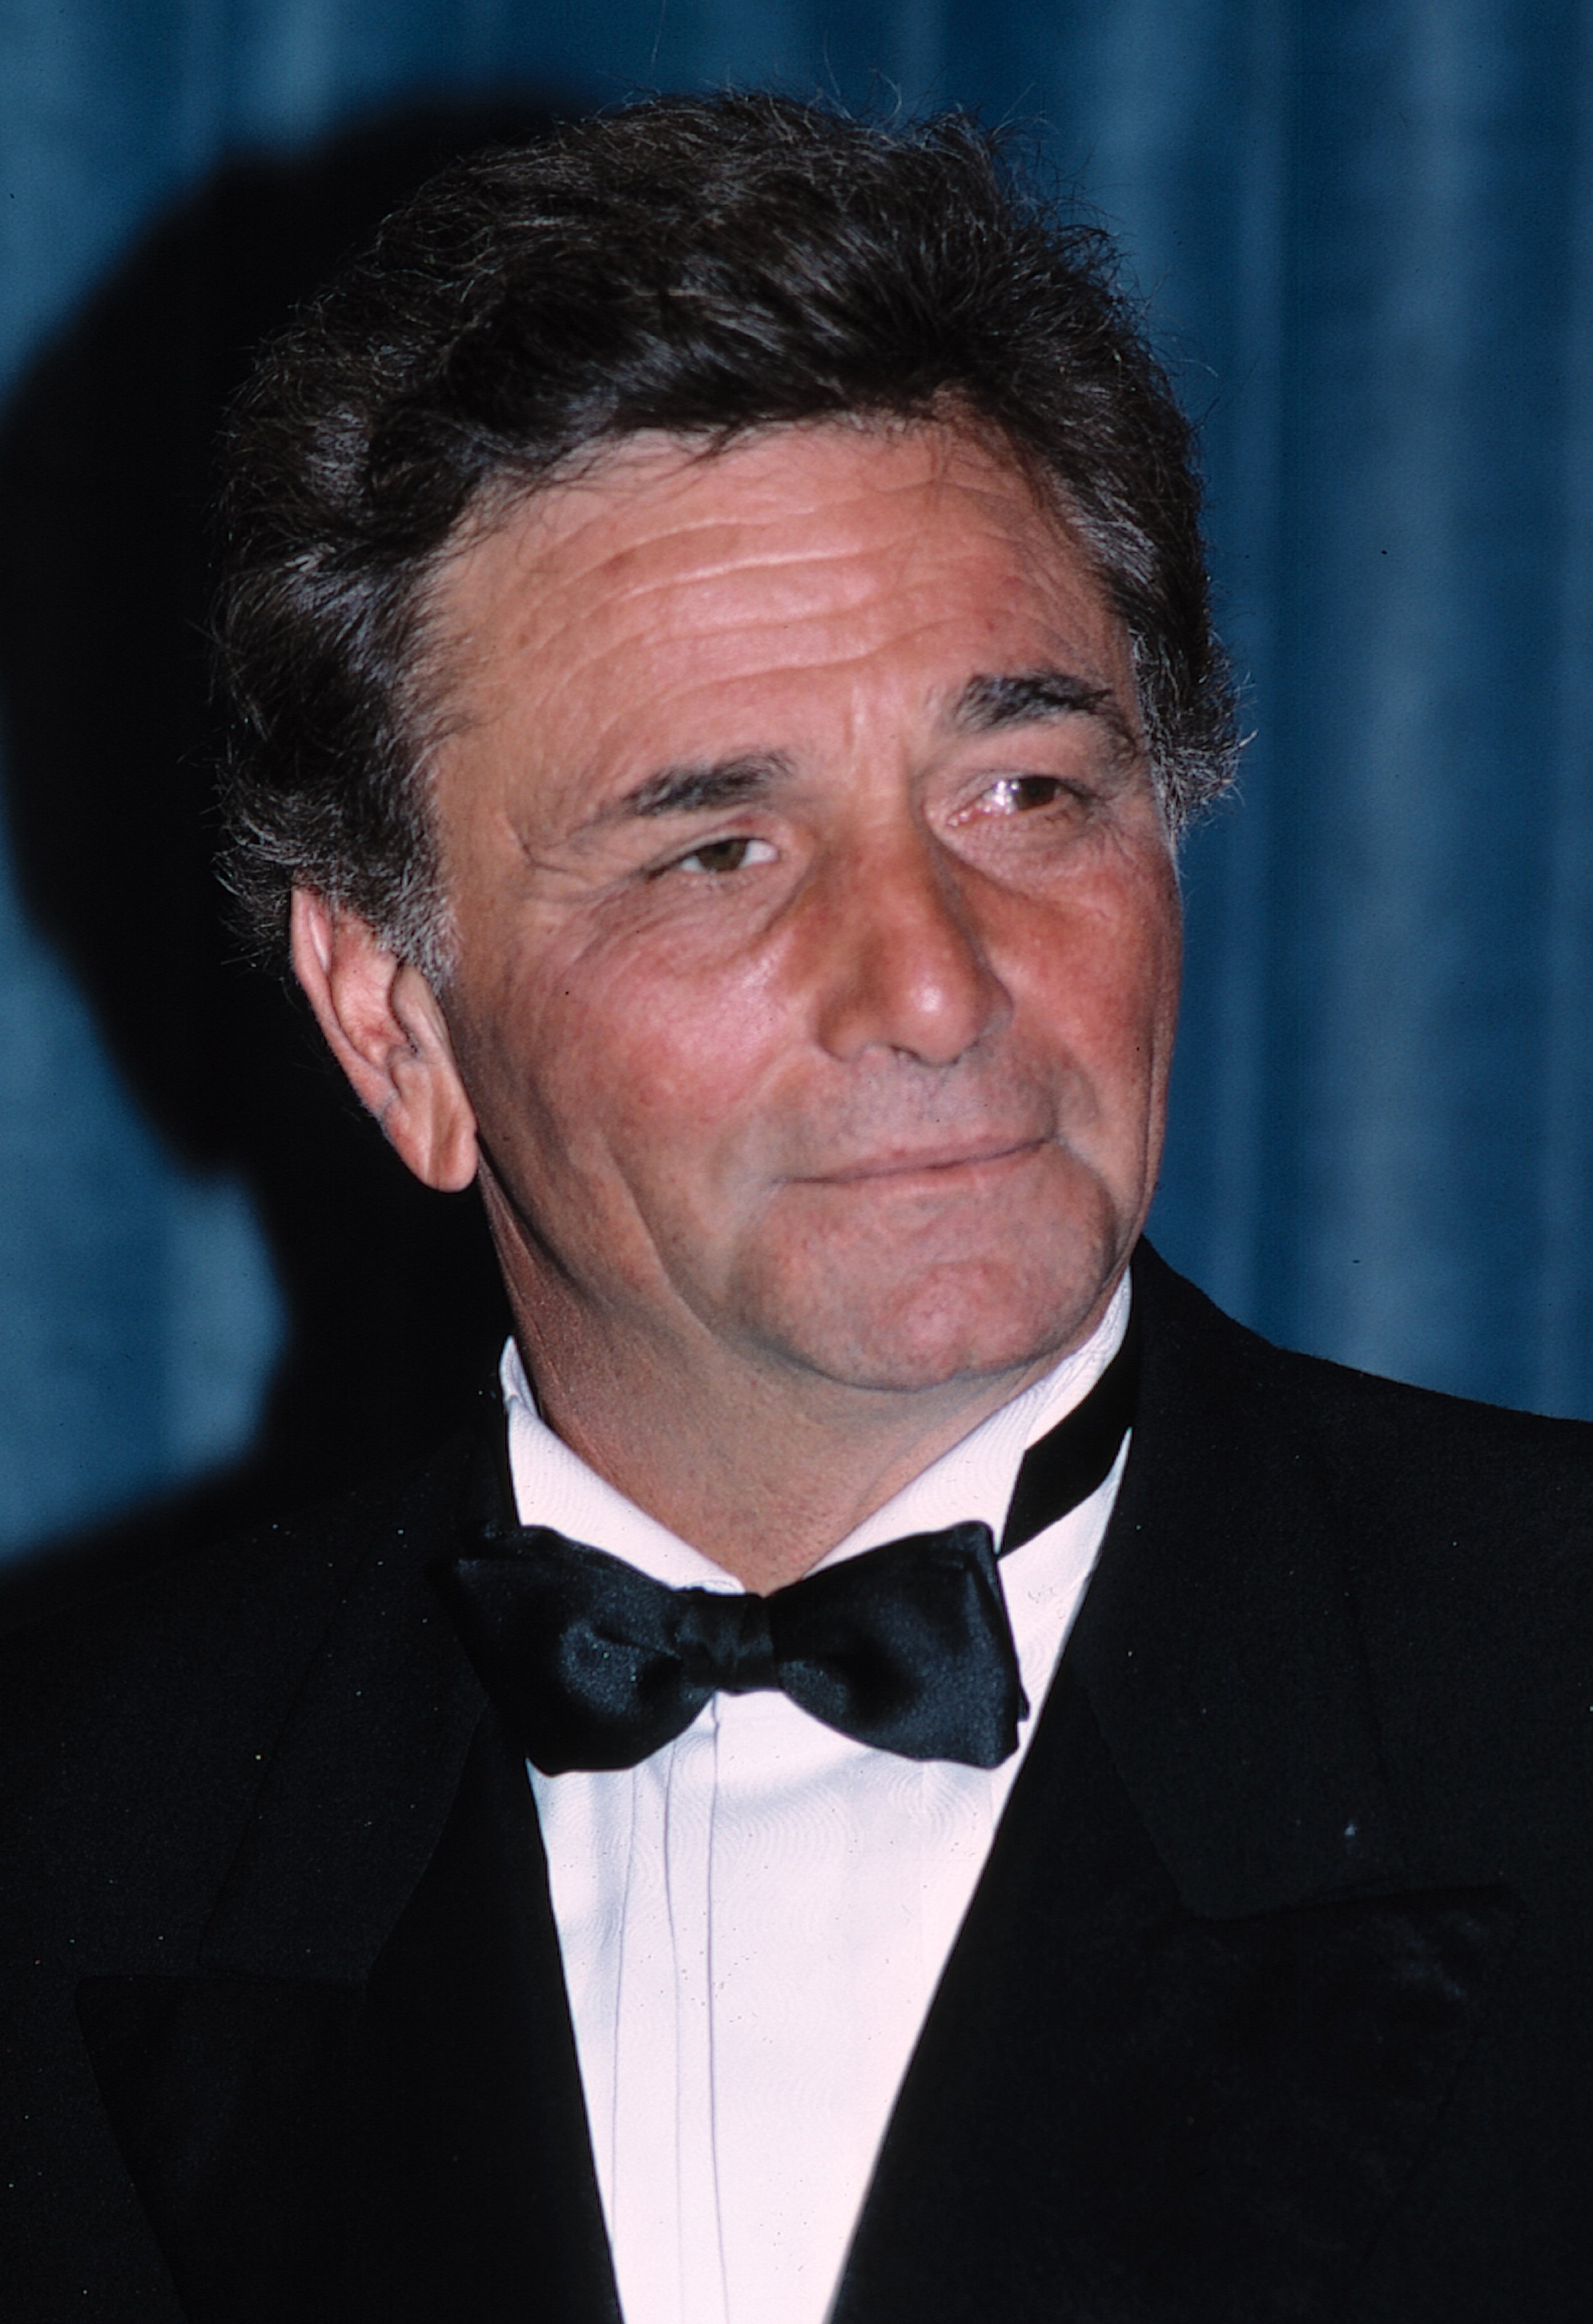 Peter Falk attending the 1985 Emmy Awards in Los Angeles California. | Source: Getty Images